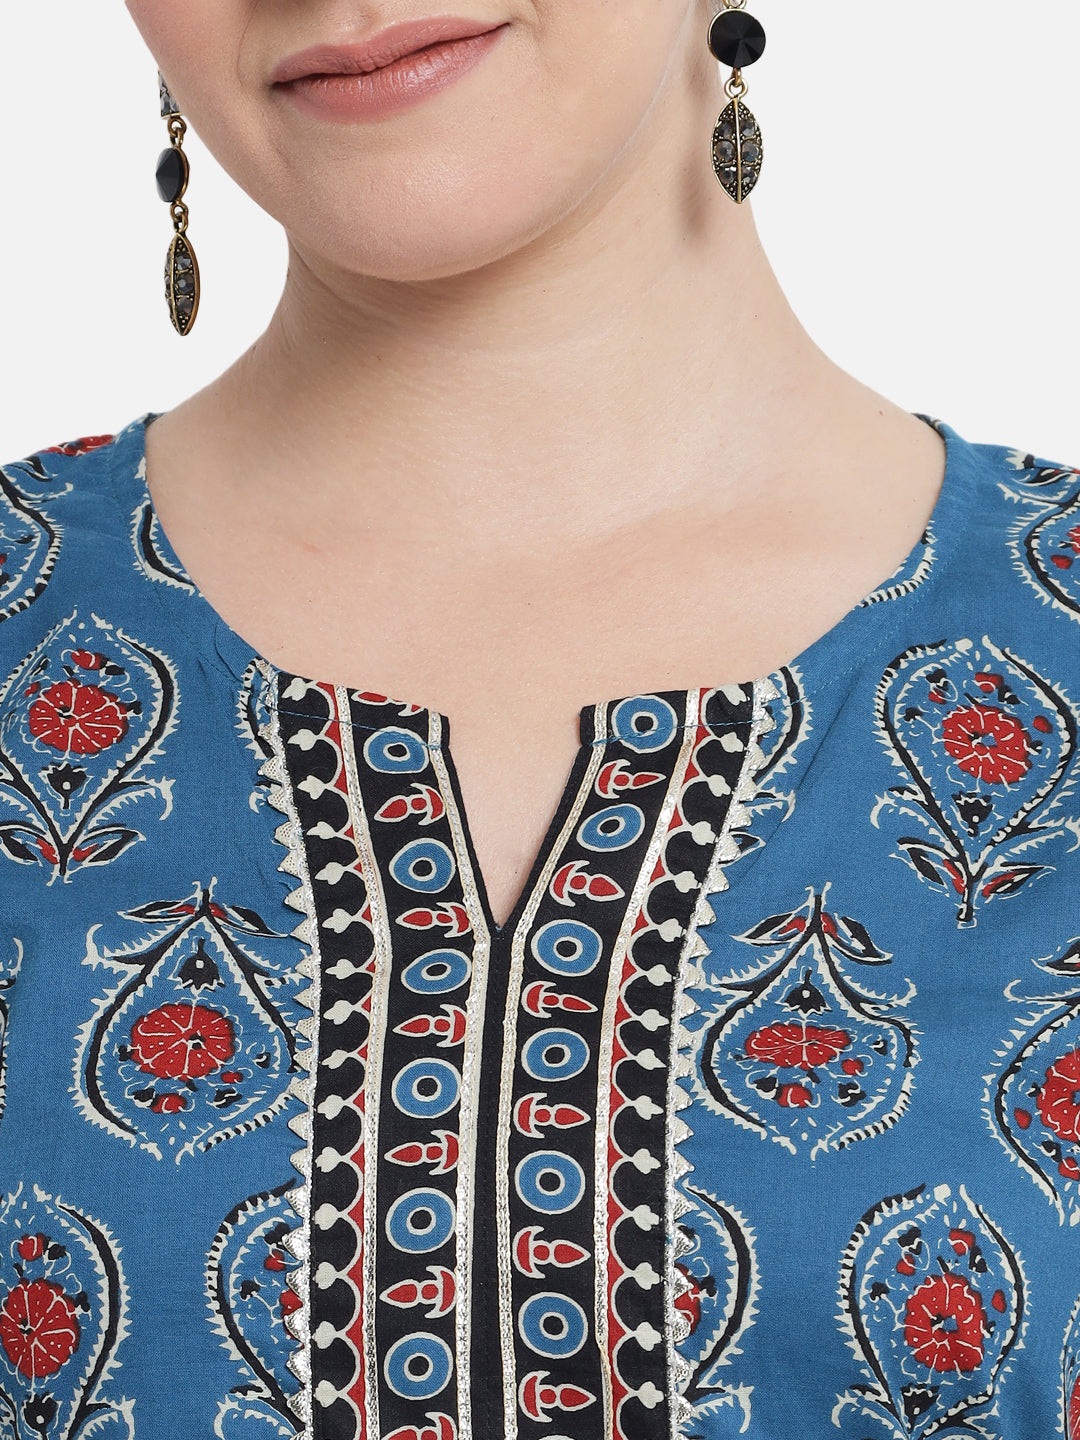 Women's Blue Floral Printed Pure Cotton Kurta With Trousers & With Dupatta - Meeranshi